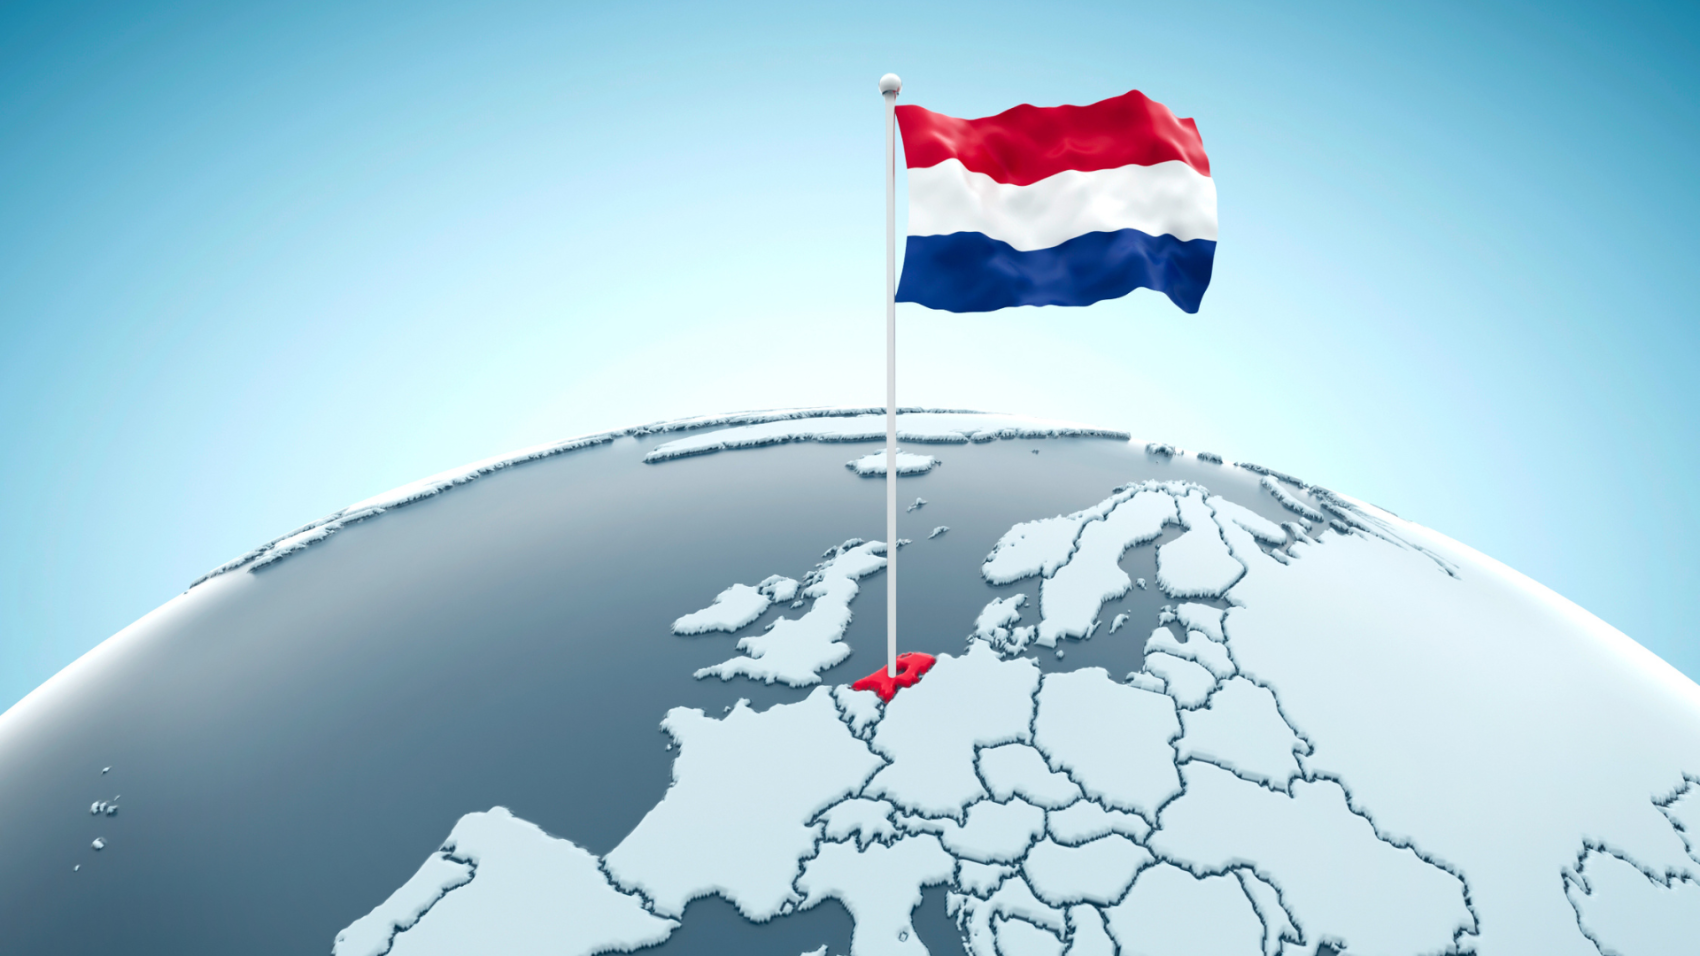 relocate non-eu staff to the netherlands